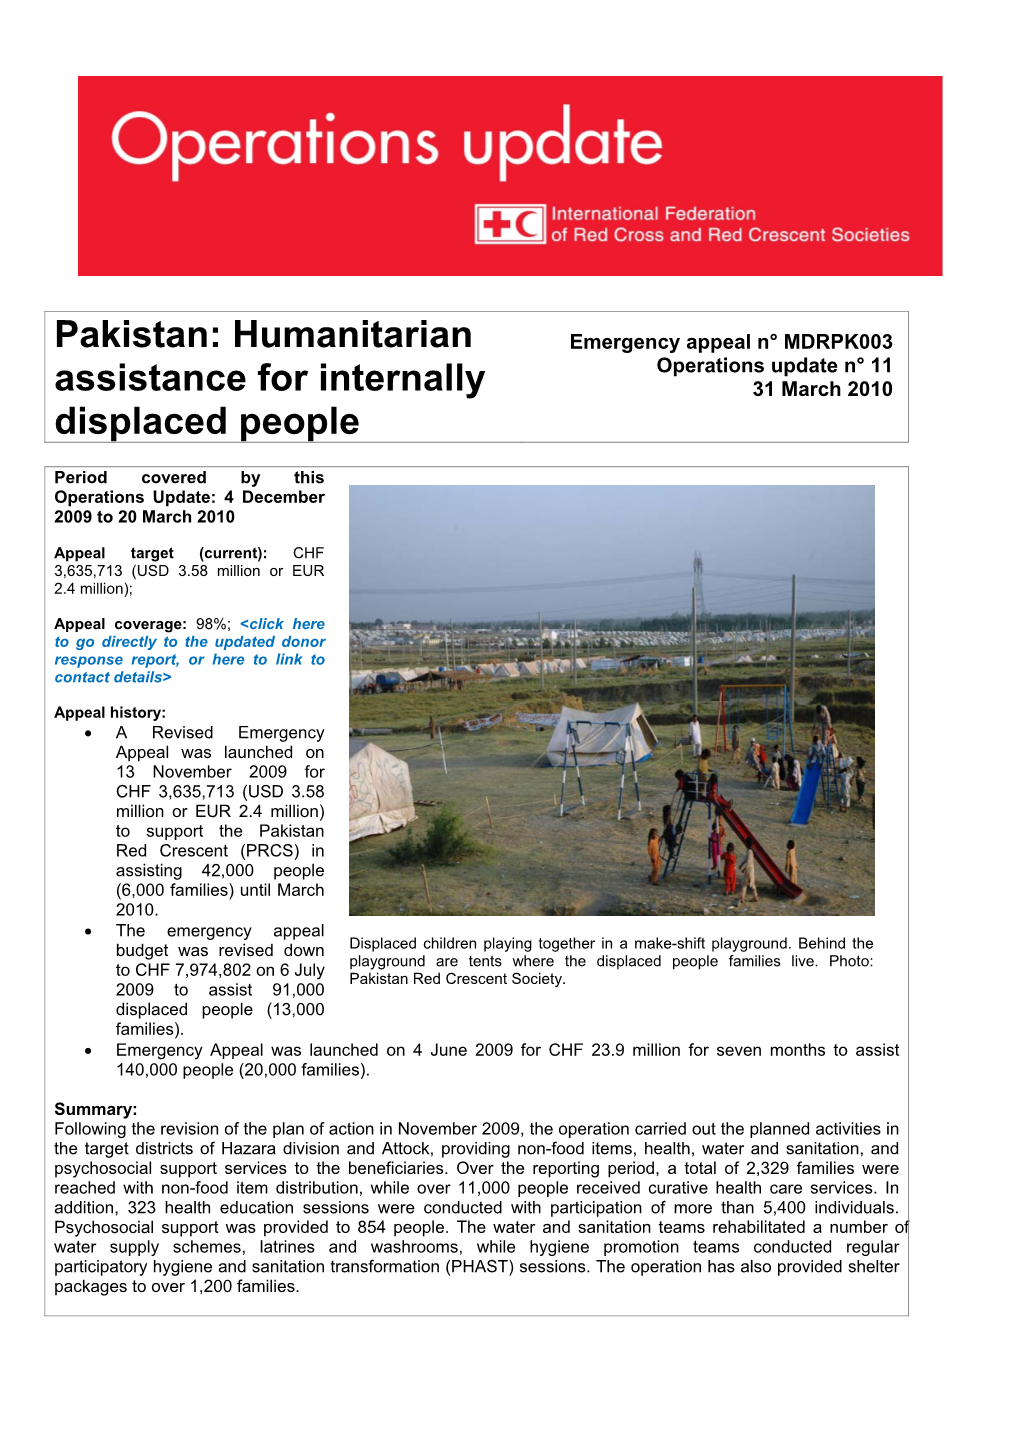 Humanitarian Assistance for Internally Displaced People